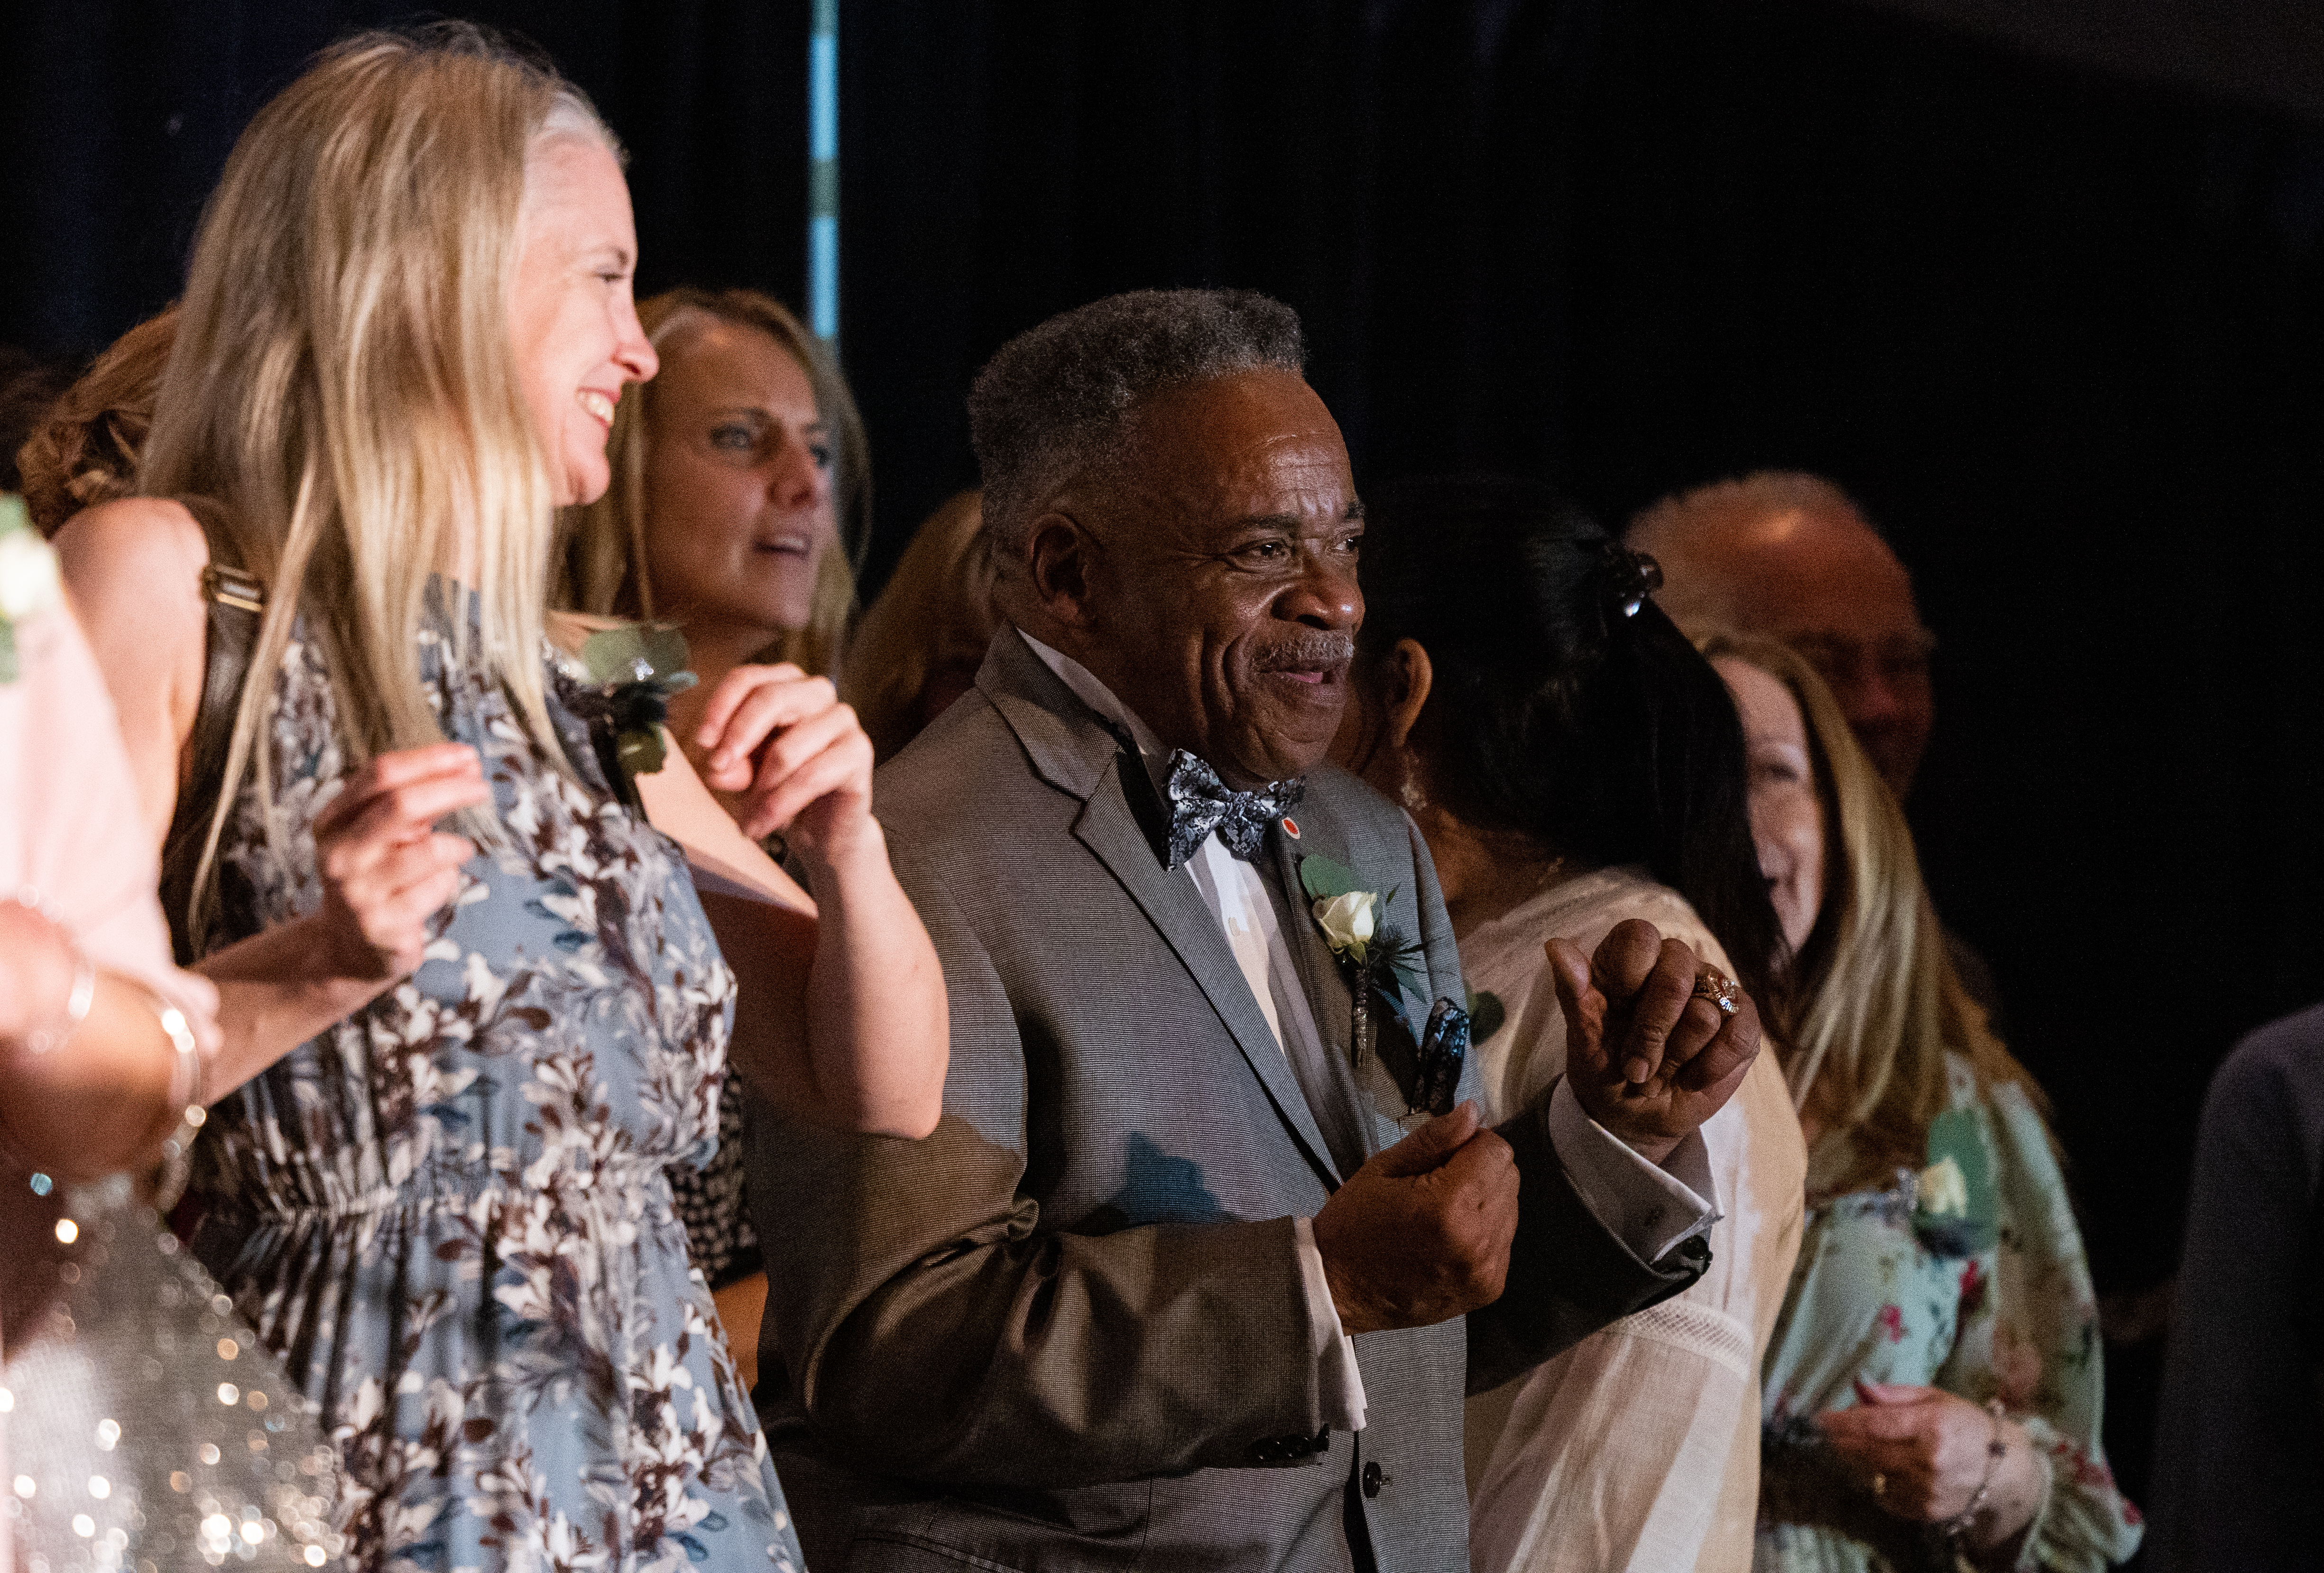 Finalists dancing and having a good time while being recognized on stage at the 25th annual Howdy Awards for Hospitality Excellence held at the MassMutual Center Monday evening, May 16, 2022. (Hoang ‘Leon’ Nguyen / The Republican)